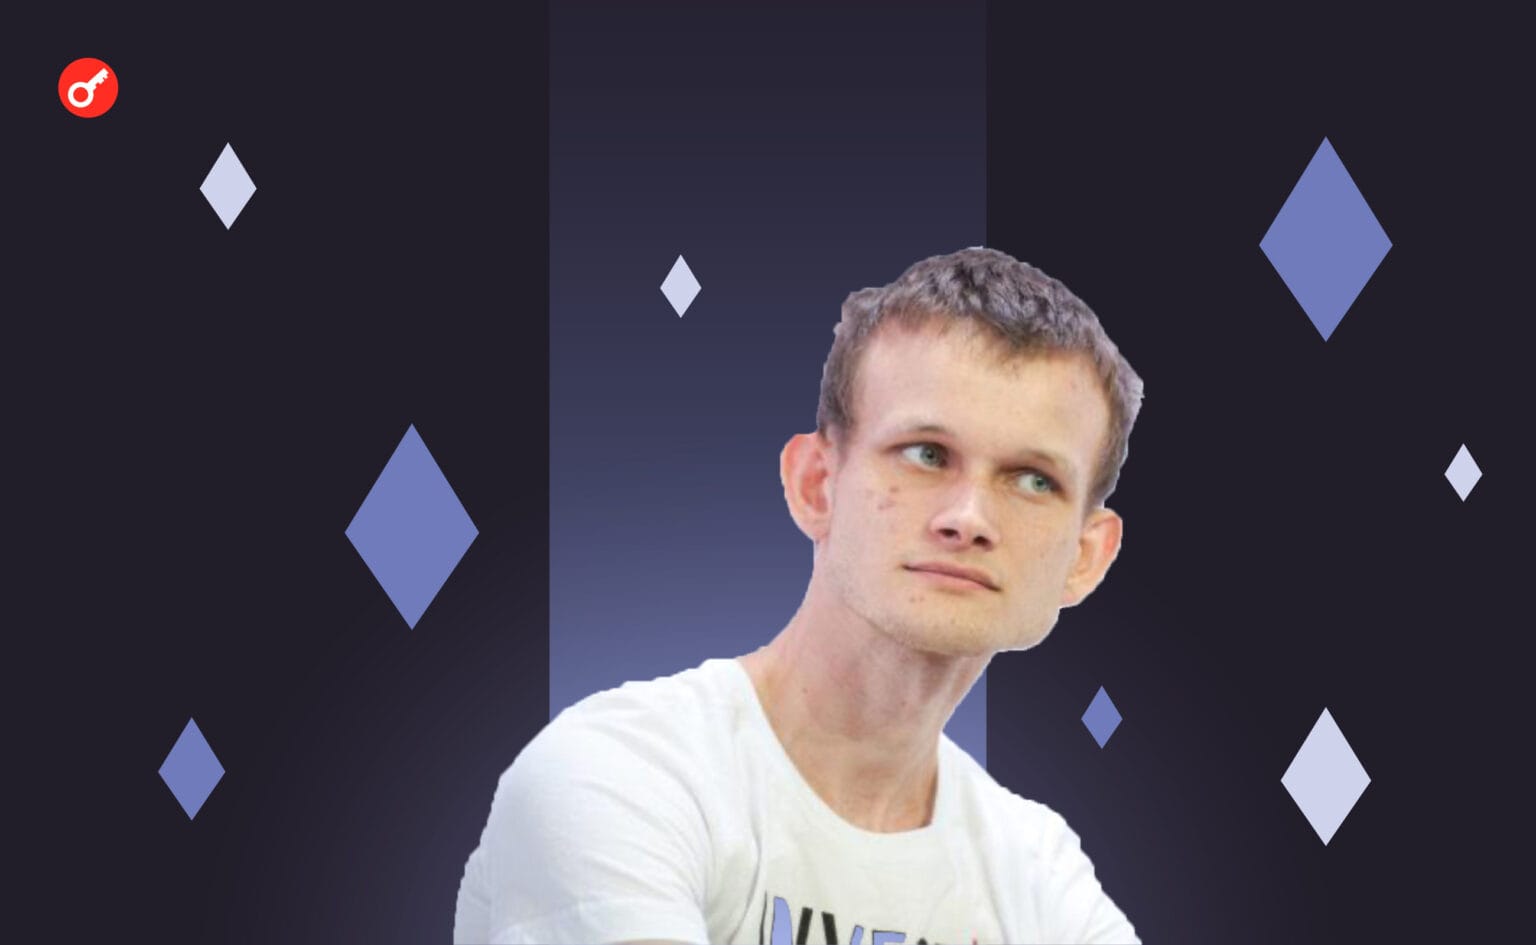 Representatives of the crypto community called on Vitalik Buterin to return to the X platform